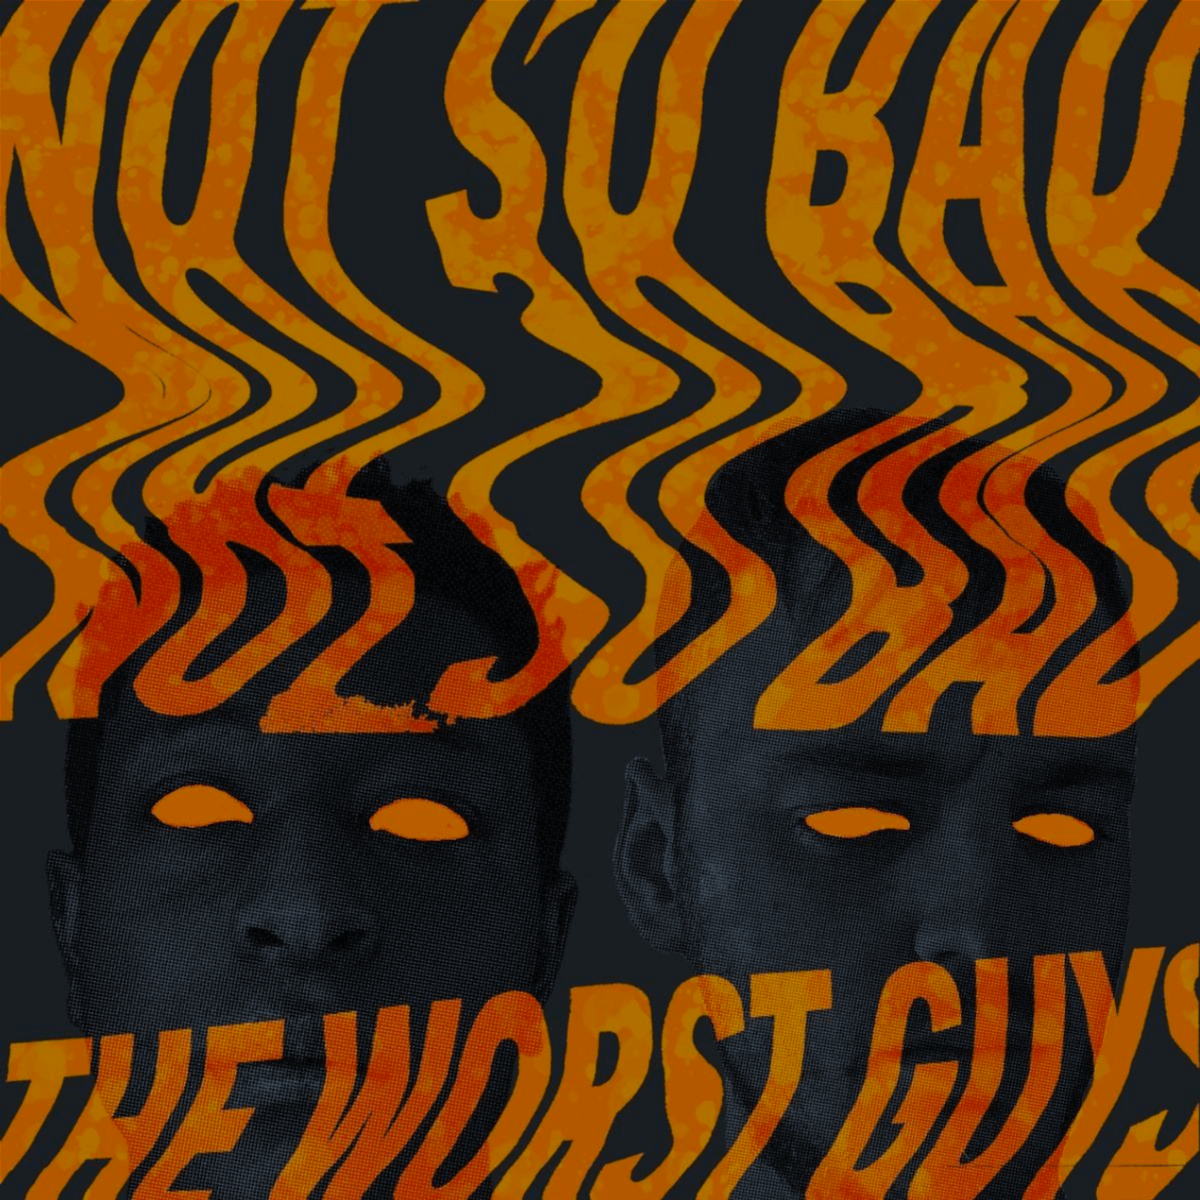 The Worst Guys – Not So Bad EP Review